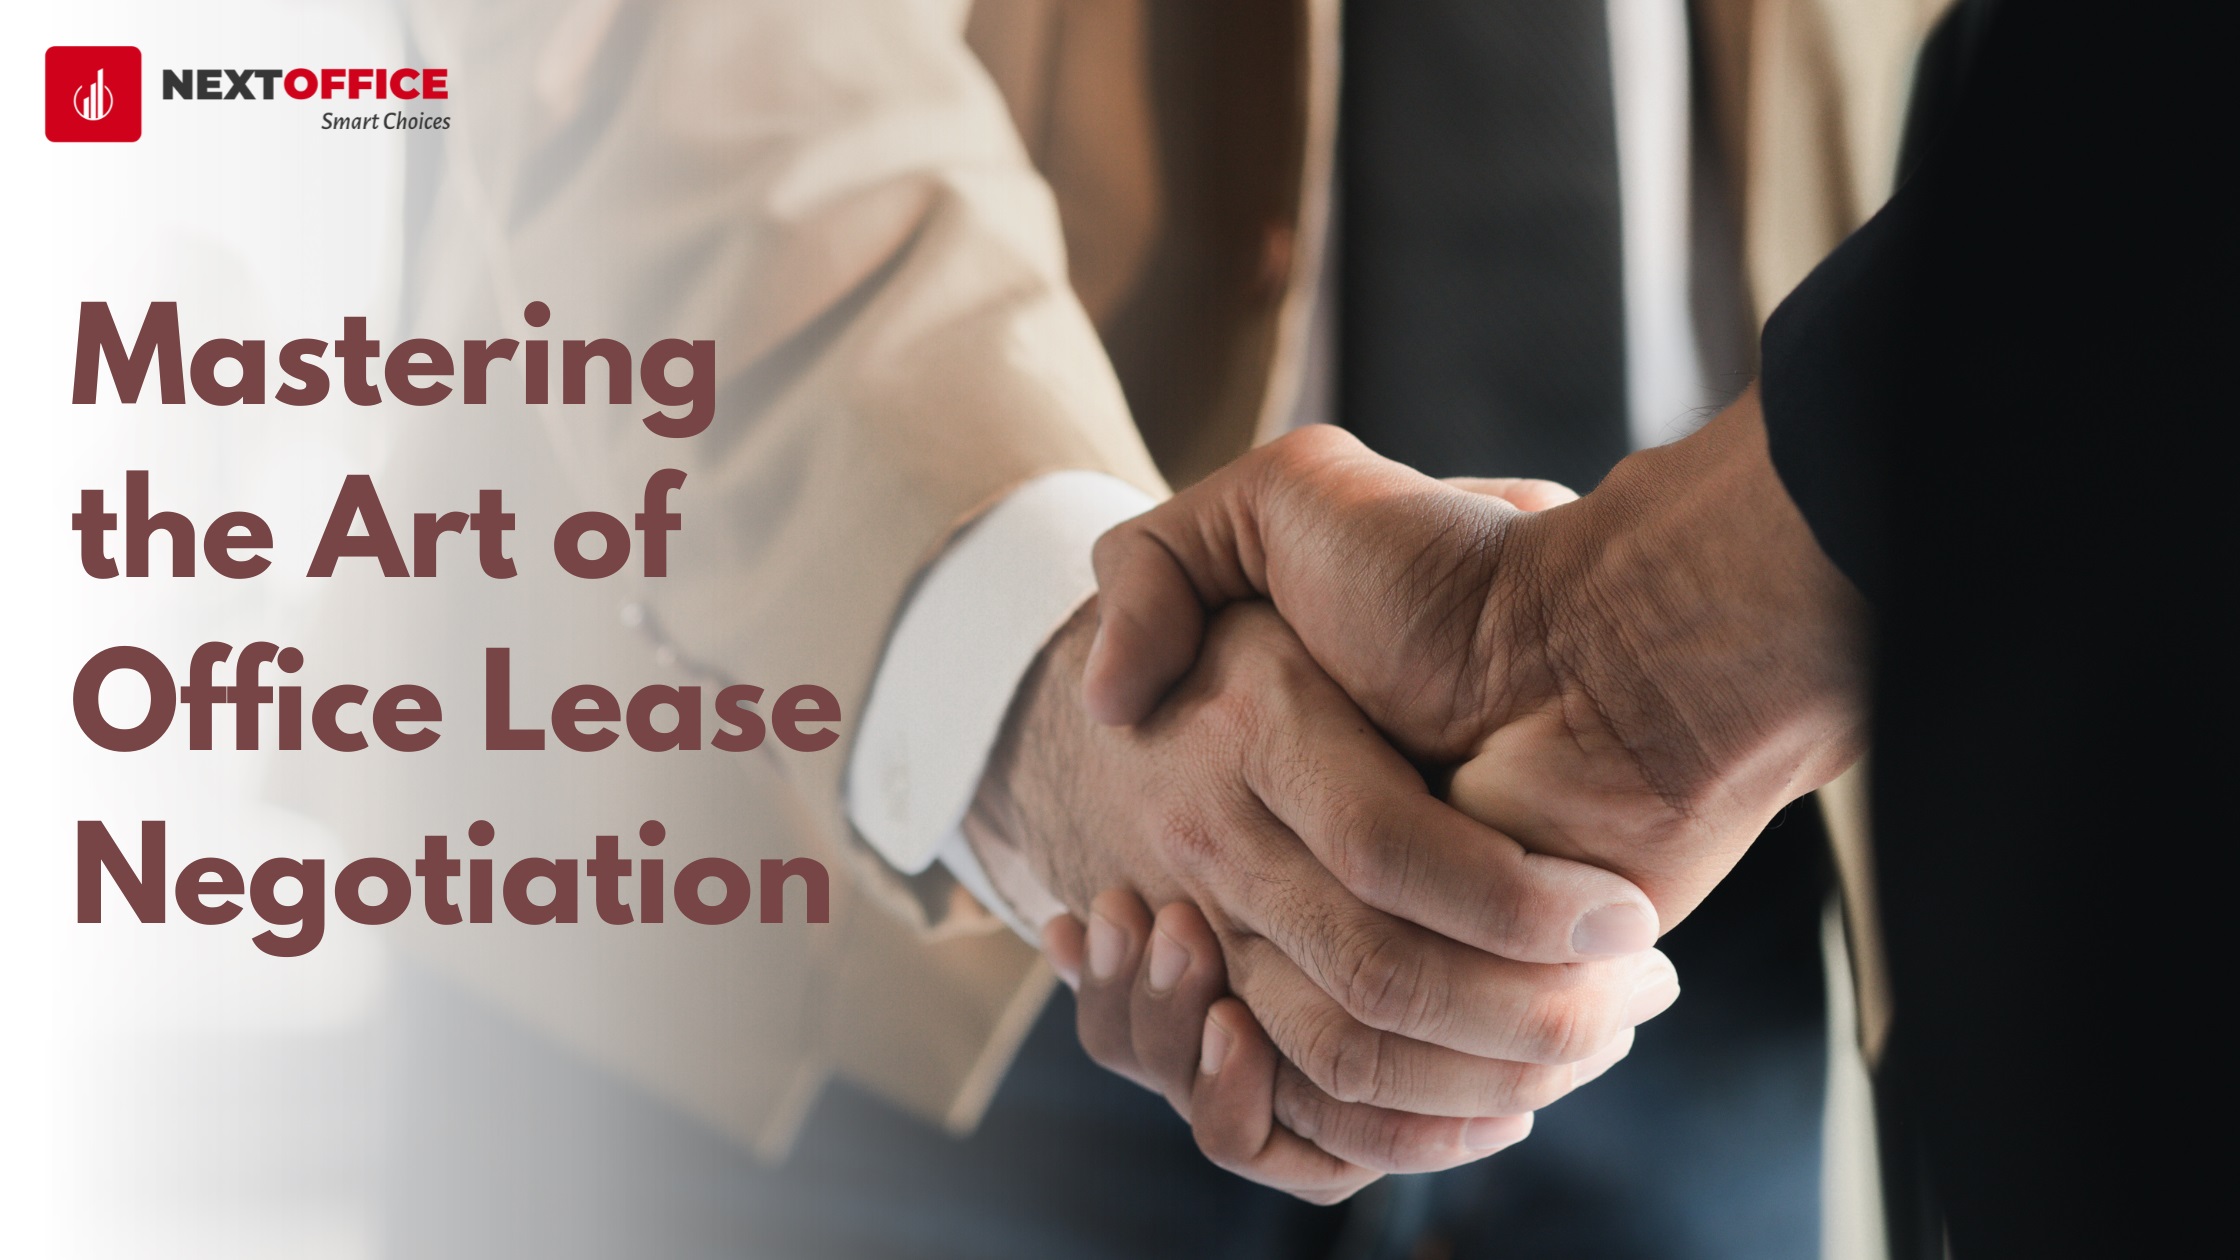 Mastering the Art of Office Lease Negotiation